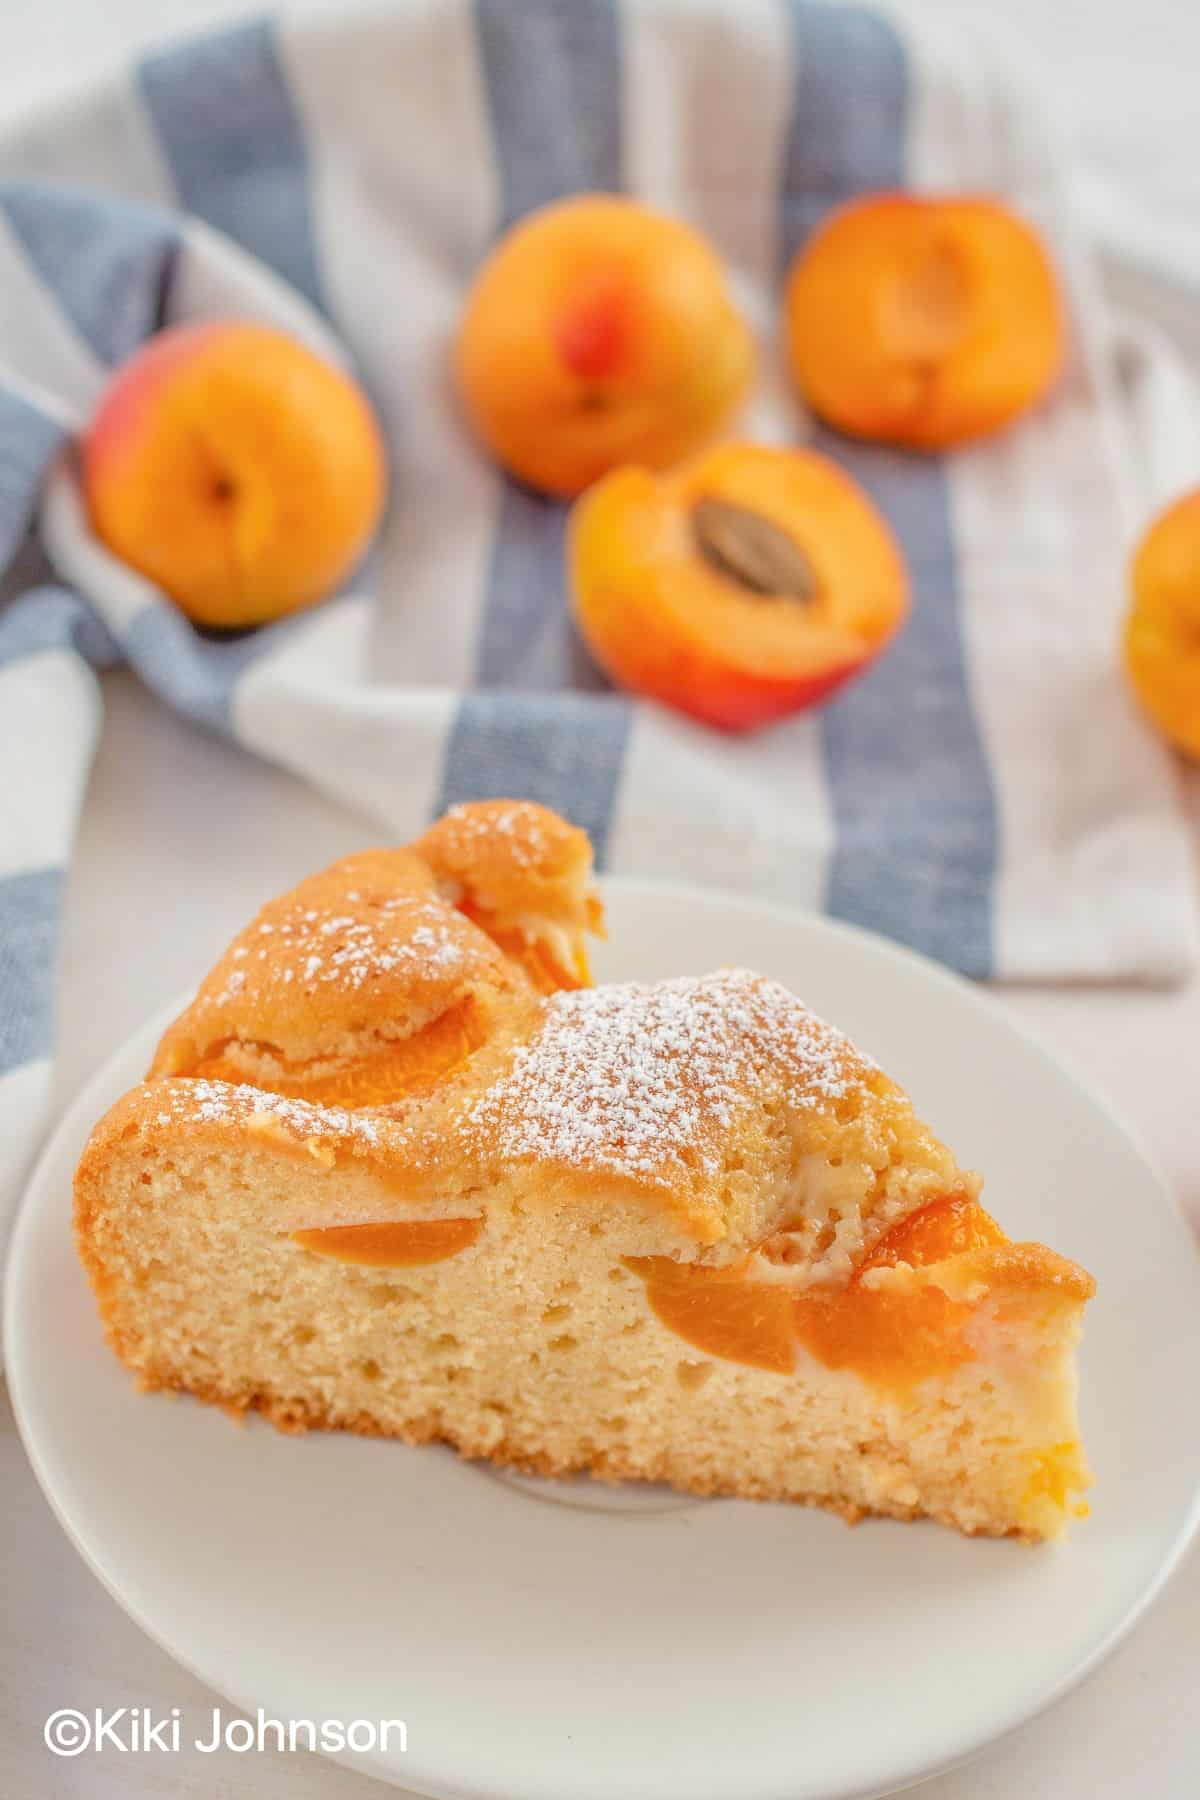 a slice of Austrian Apricot cake with fresh apricots in the background